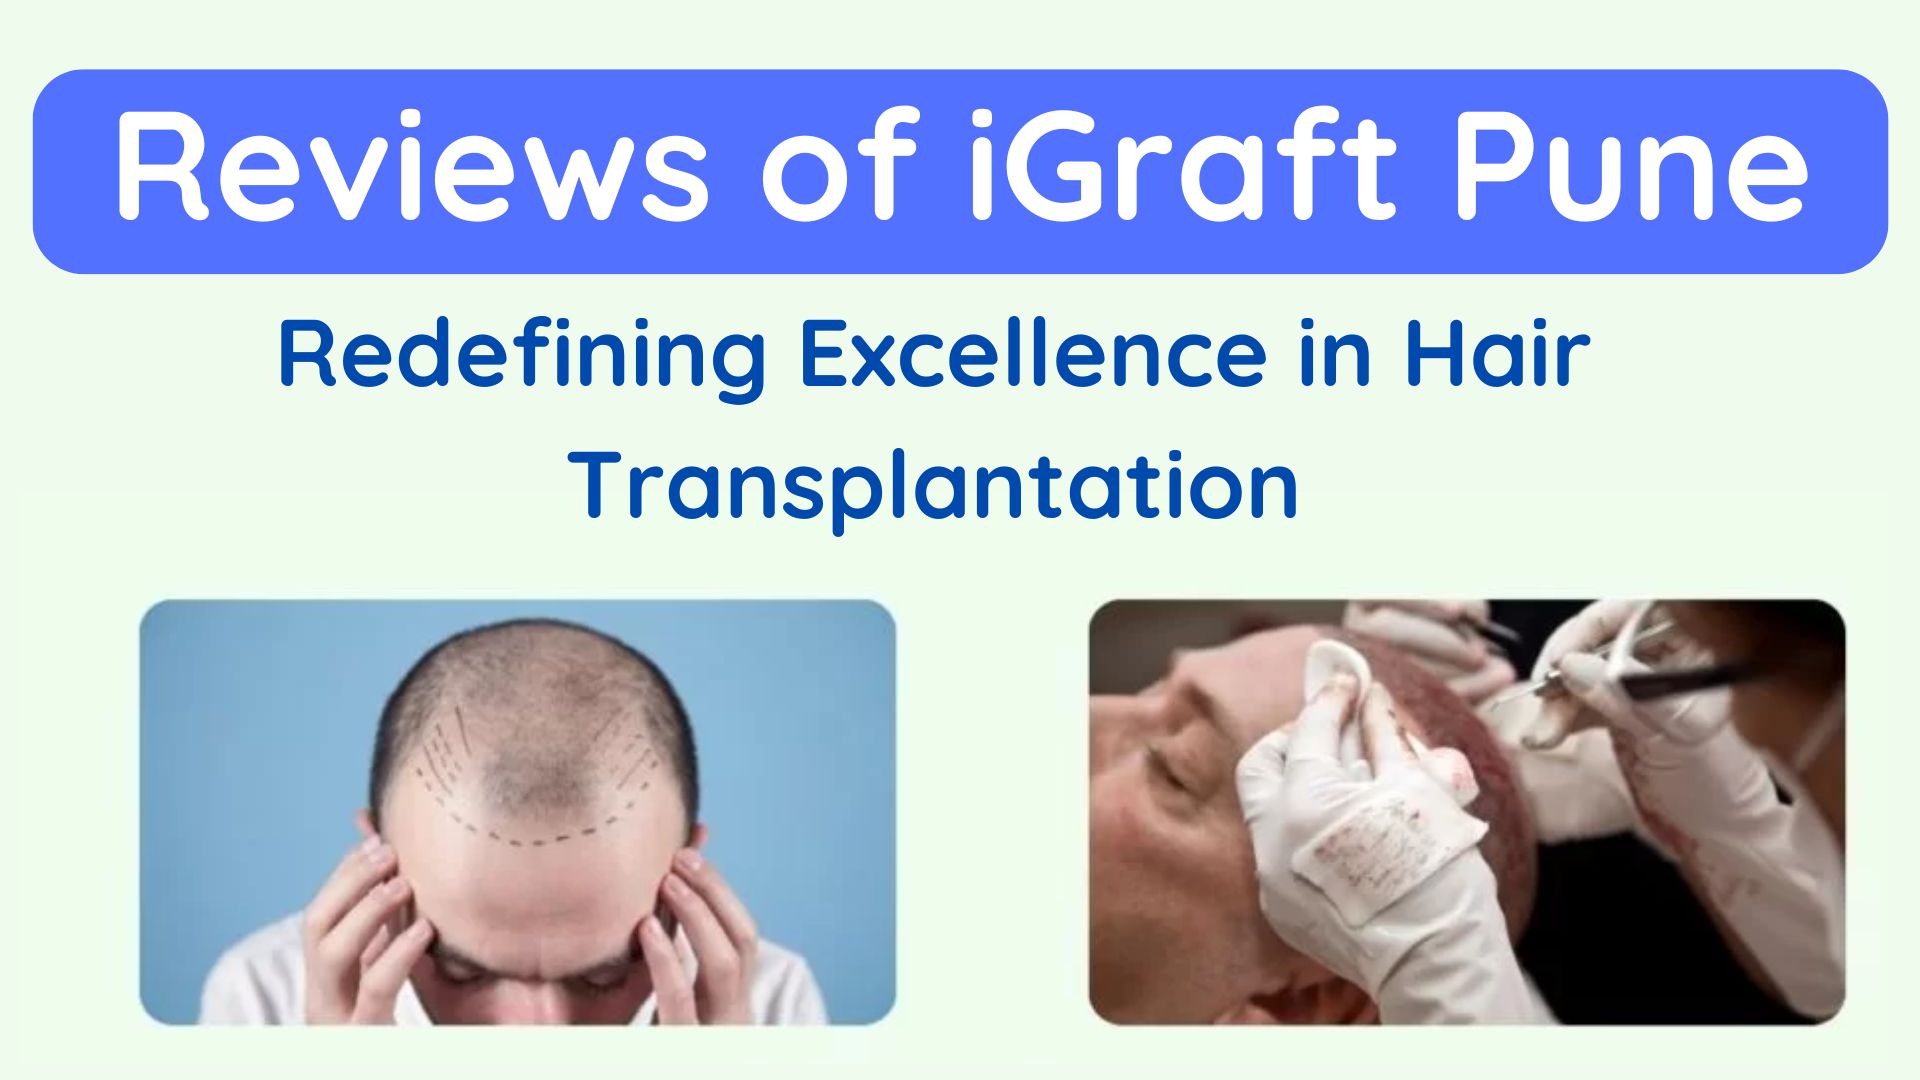 Redefining Excellence in Hair Transplantation